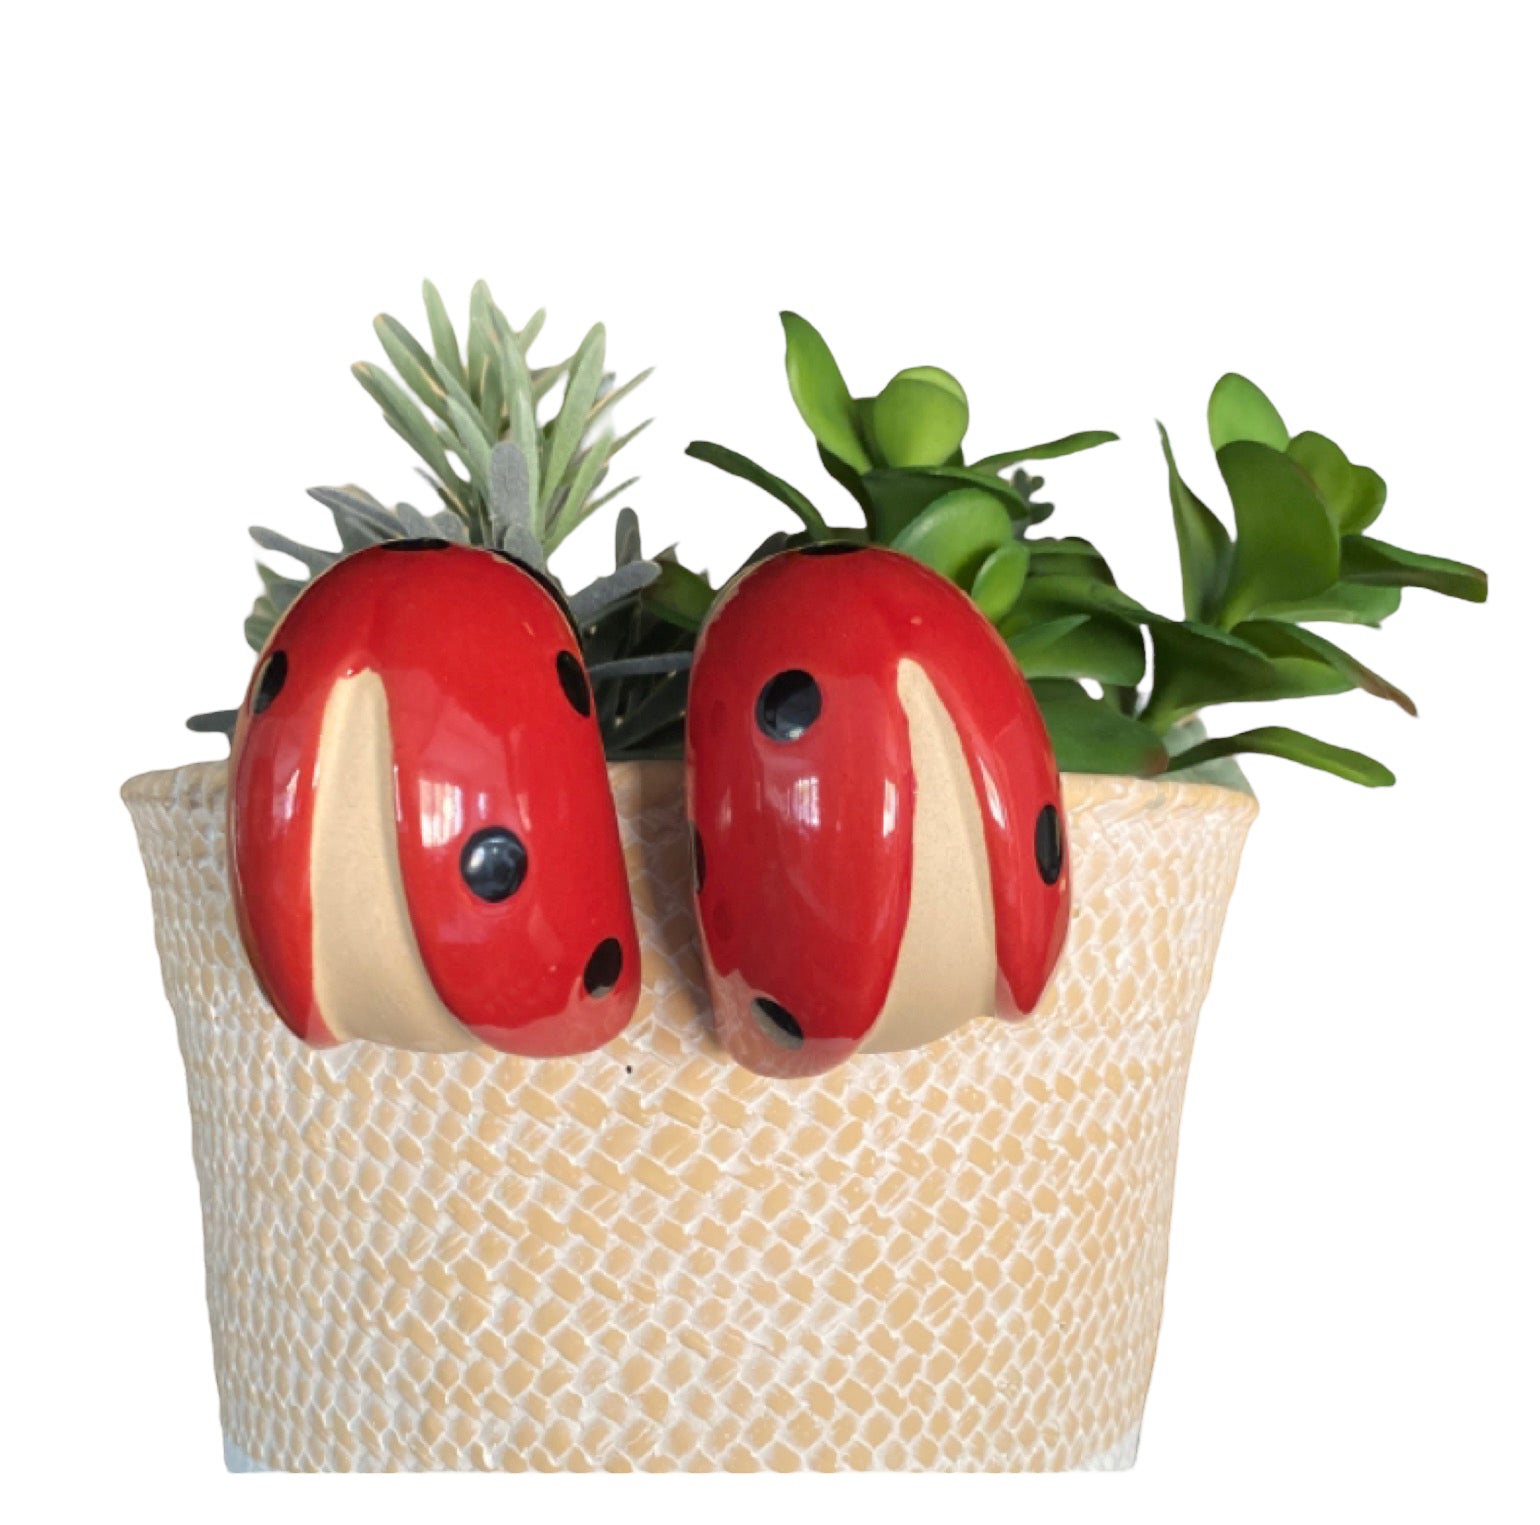 Ladybeetle Pot Sitter Hanger Planter x 2 - The Renmy Store Homewares & Gifts 